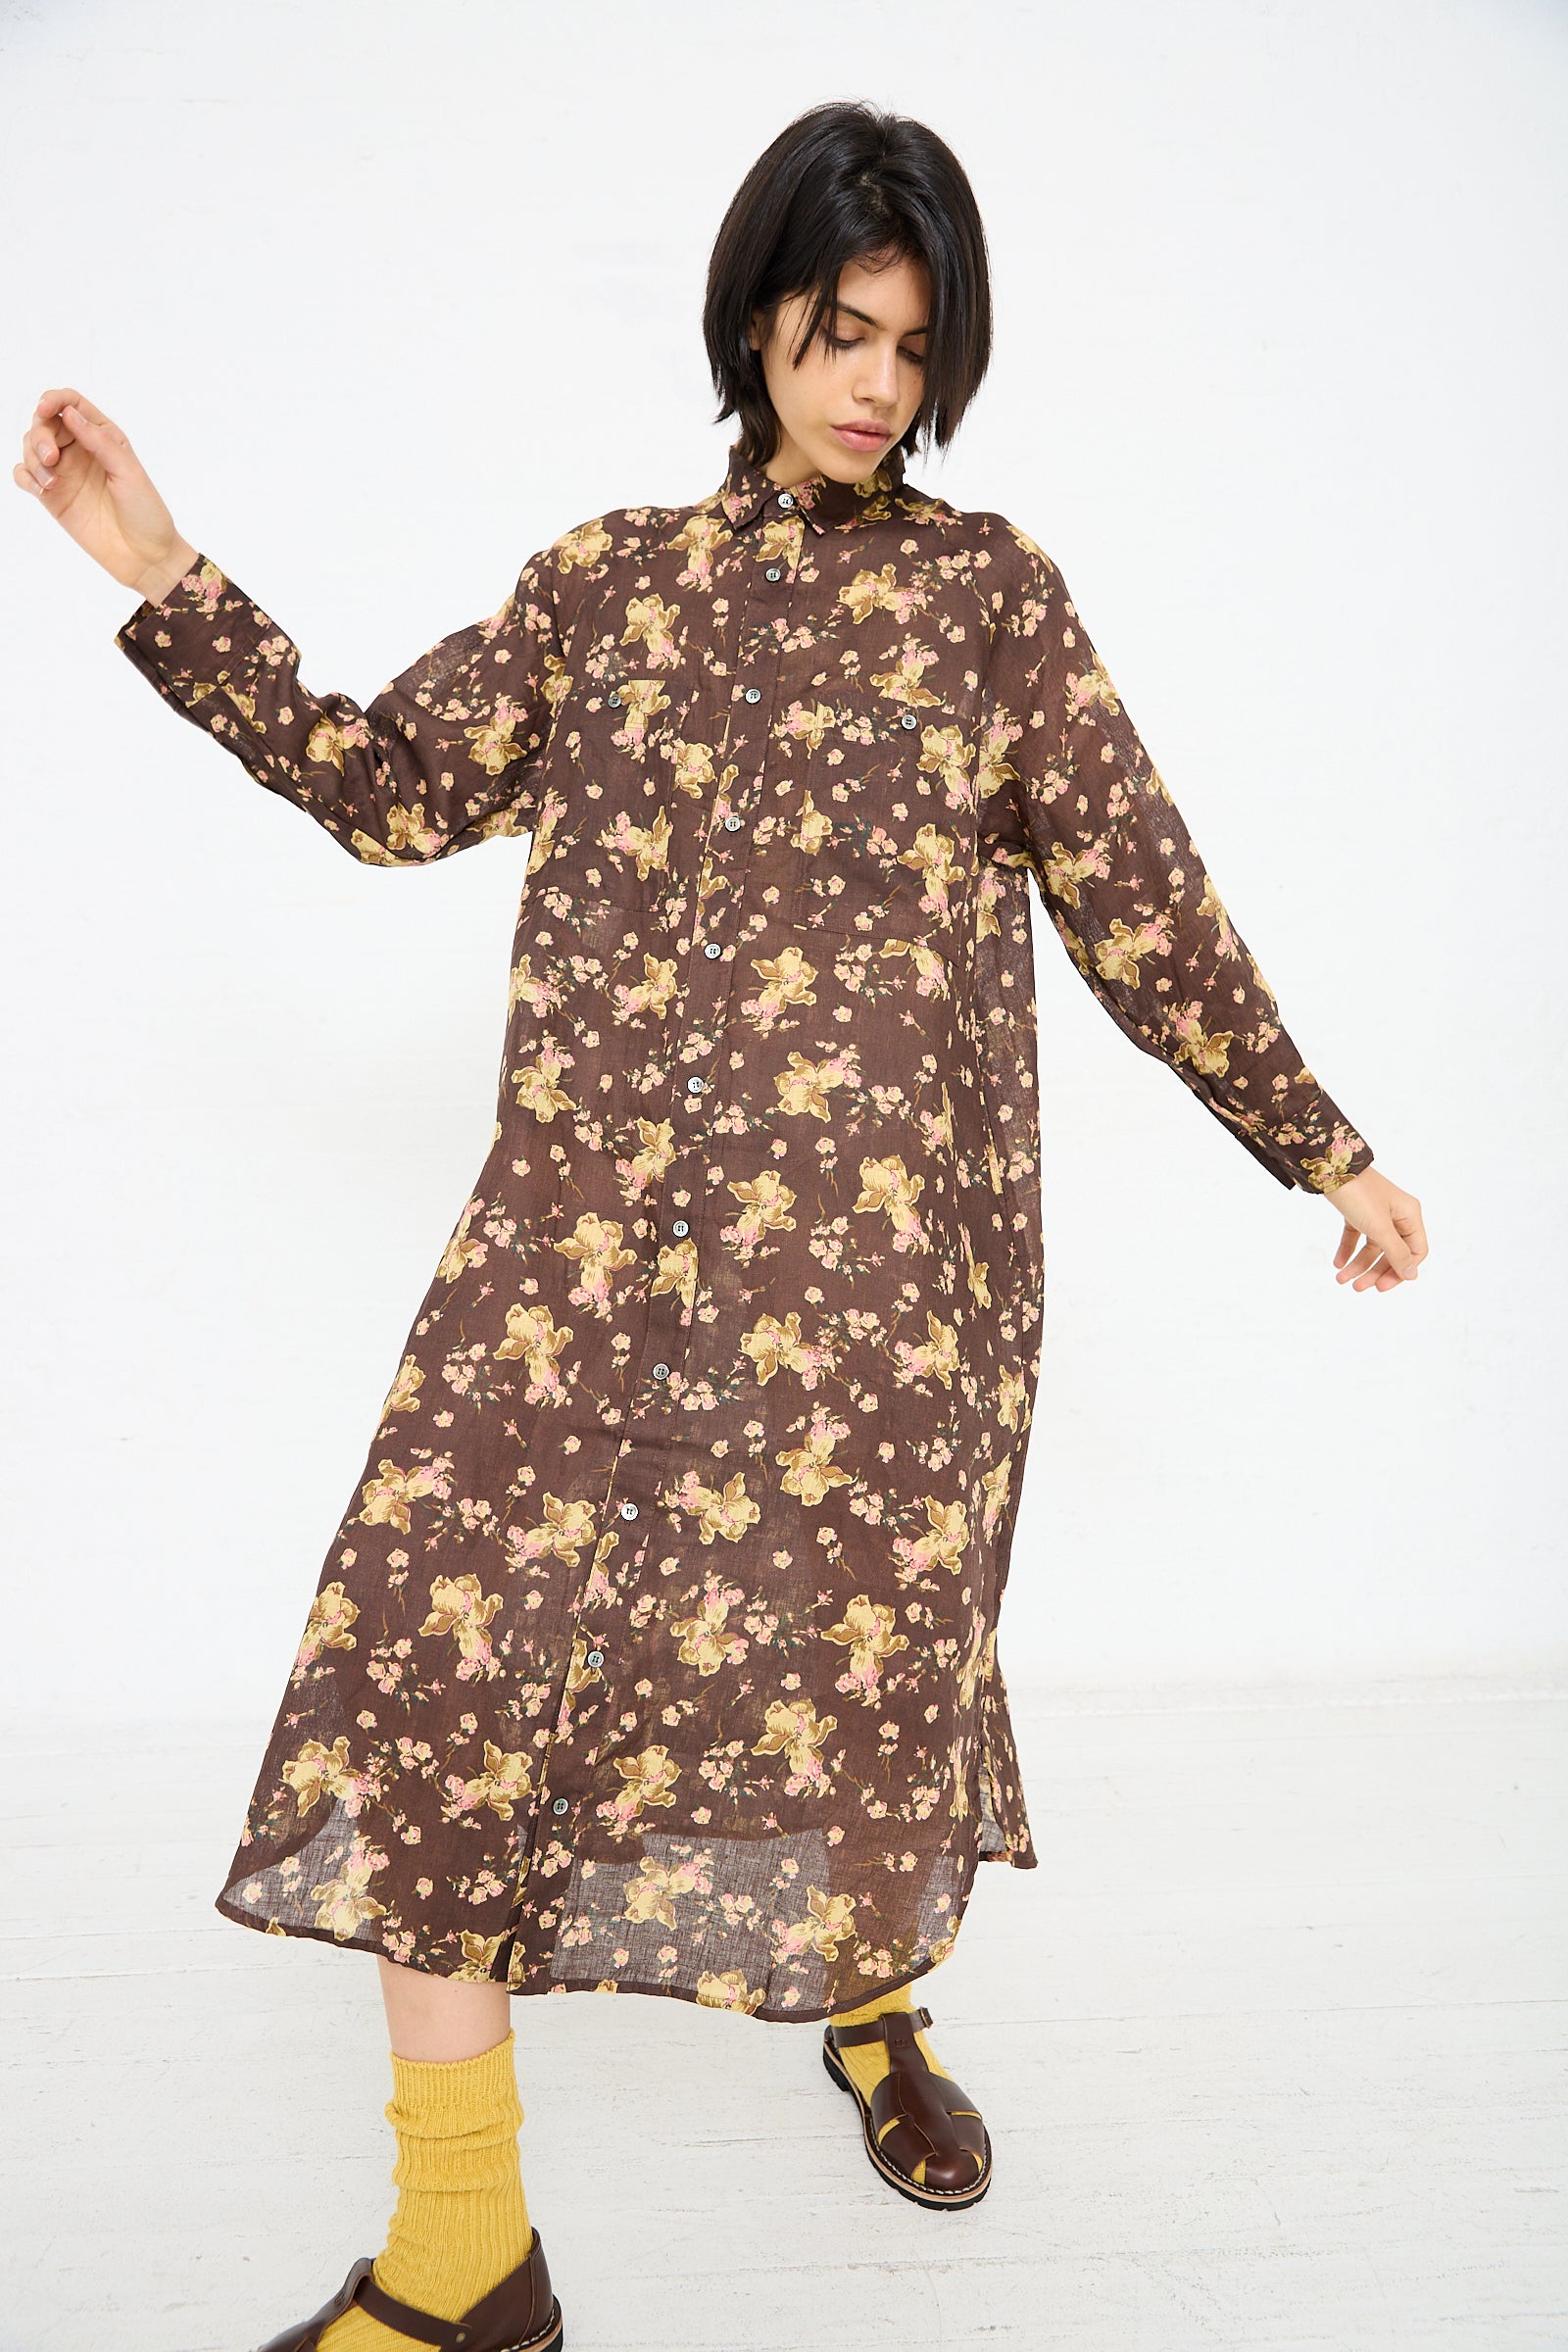 A person stands against a white background wearing the Linen Flower Print Dress in Brown by Ichi Antiquités and yellow socks with brown sandals. They have dark, shoulder-length hair and appear to be adjusting their sleeves.